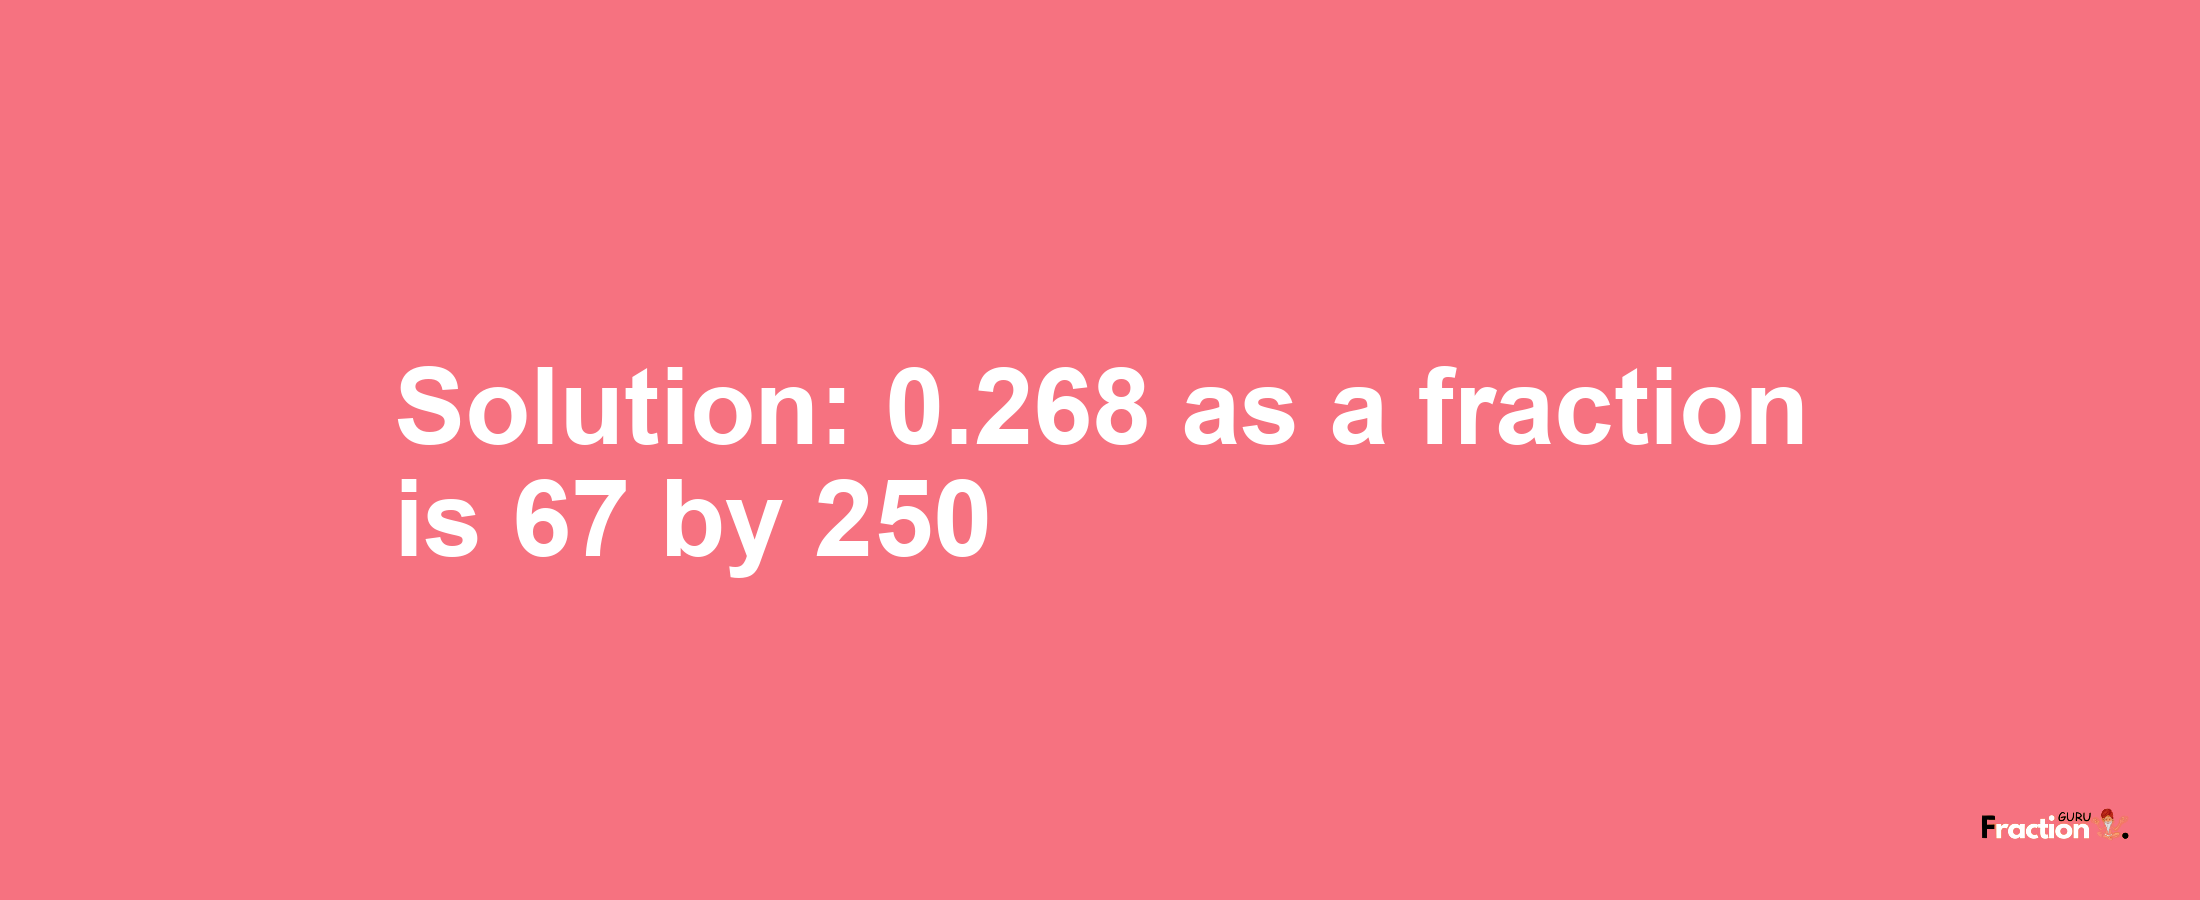 Solution:0.268 as a fraction is 67/250